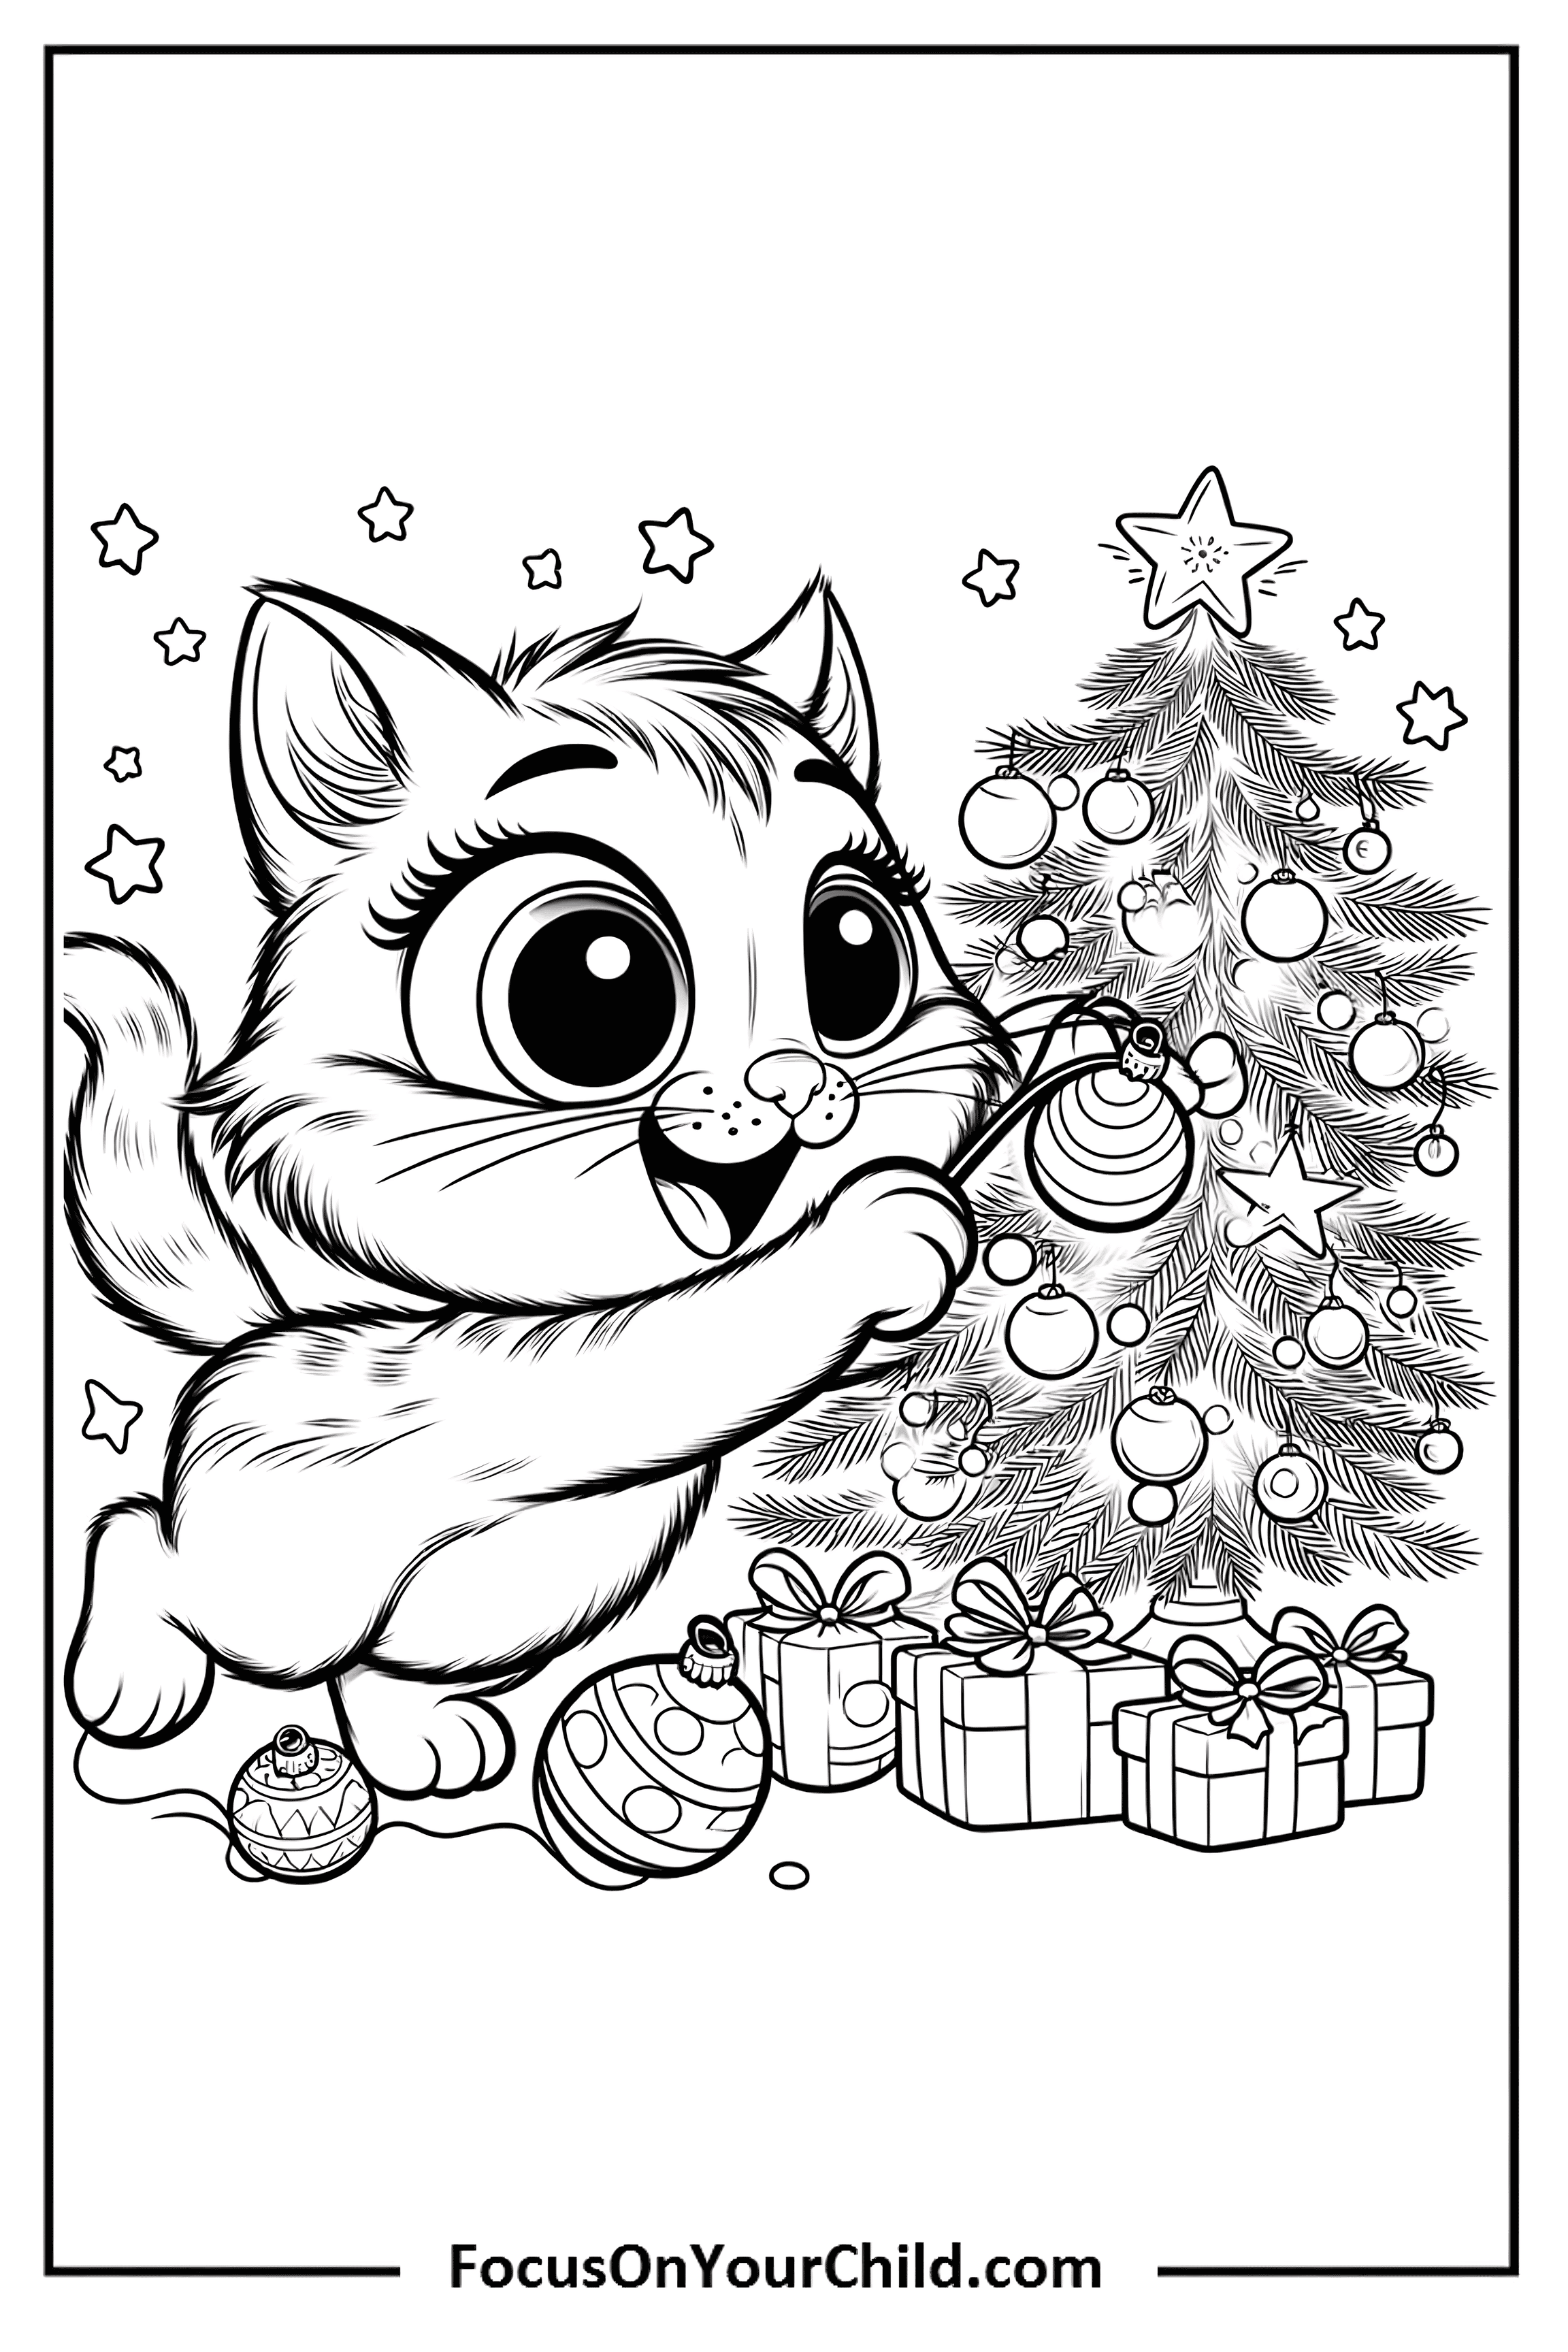 Playful cat decorating Christmas tree with ornaments and presents in festive black-and-white illustration.